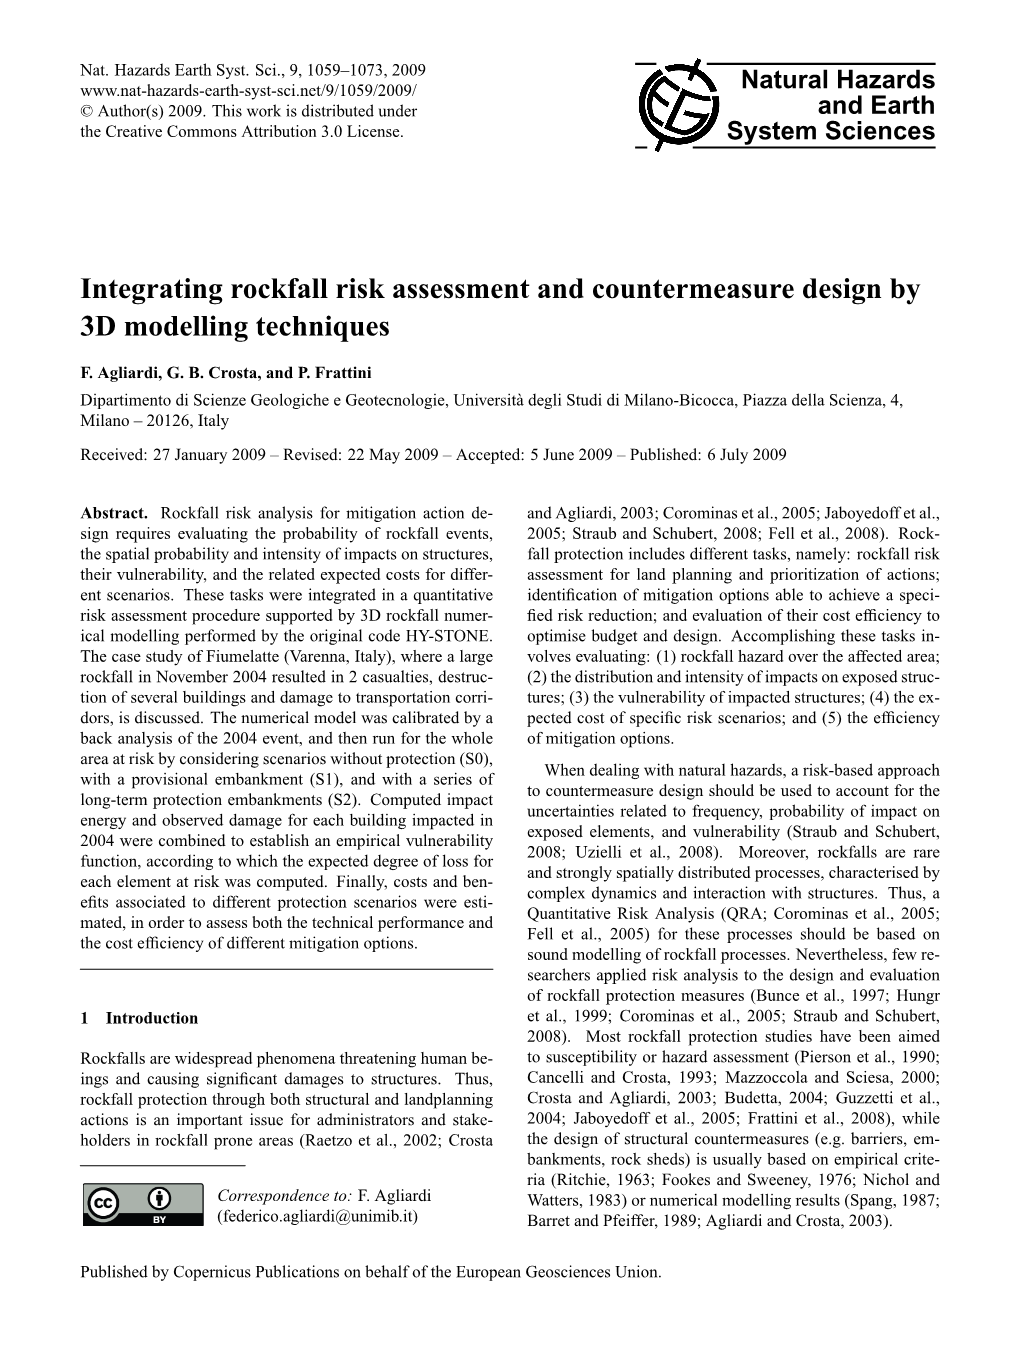 Integrating Rockfall Risk Assessment and Countermeasure Design by 3D Modelling Techniques